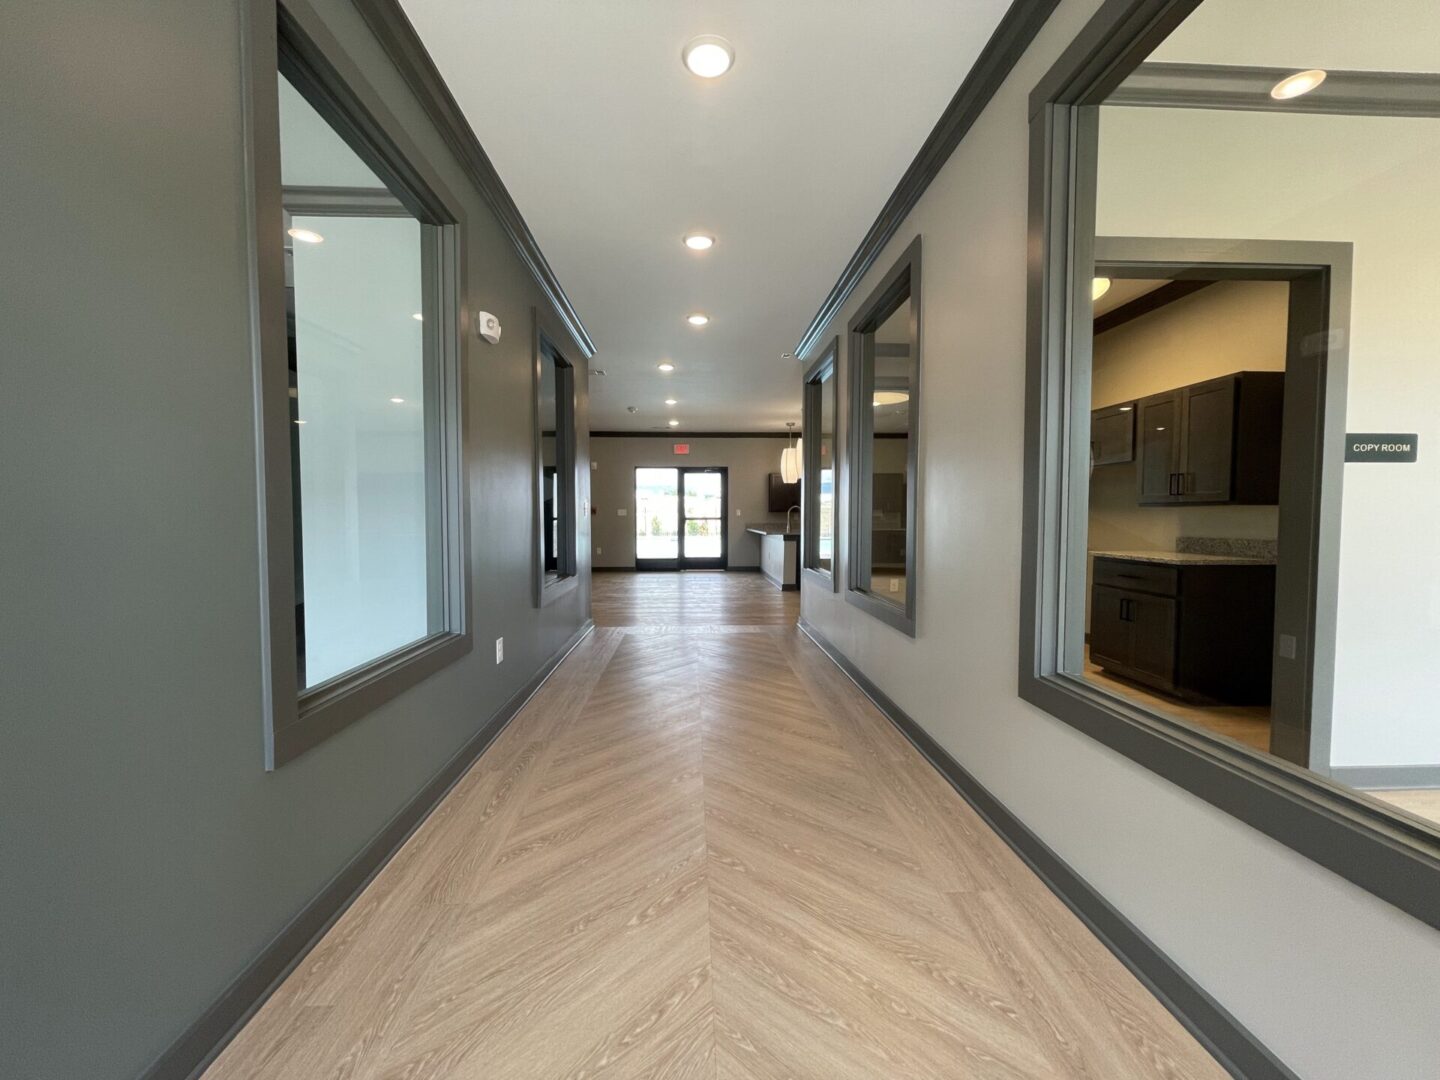 A inside view of the corridor at the Ridgeview homes